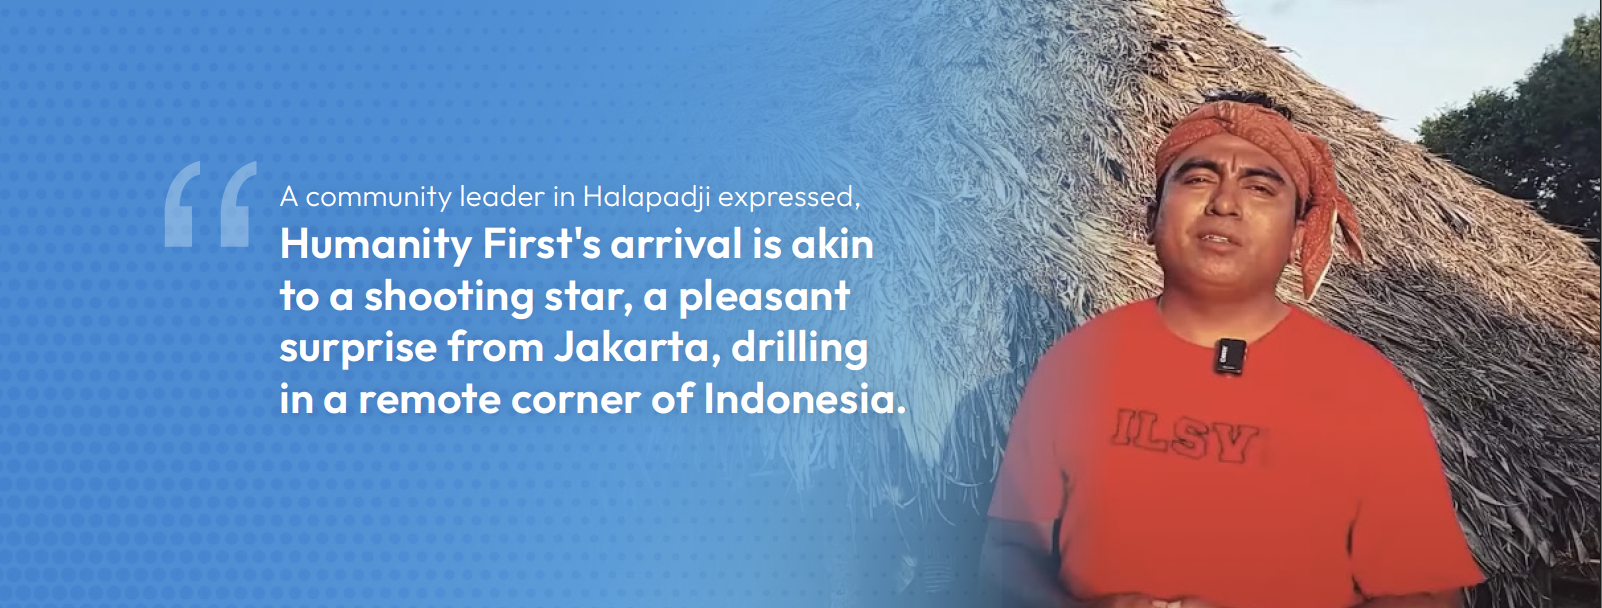 A man wearing an orange t shirt and a bandana headband stands outside a thatched building and the text reads A community leader in Halapadji expressed, Humanity First's arrival is akin to a shooting star, a pleasant surprise from Jakarta, drilling in a remote corner of Indonesia.